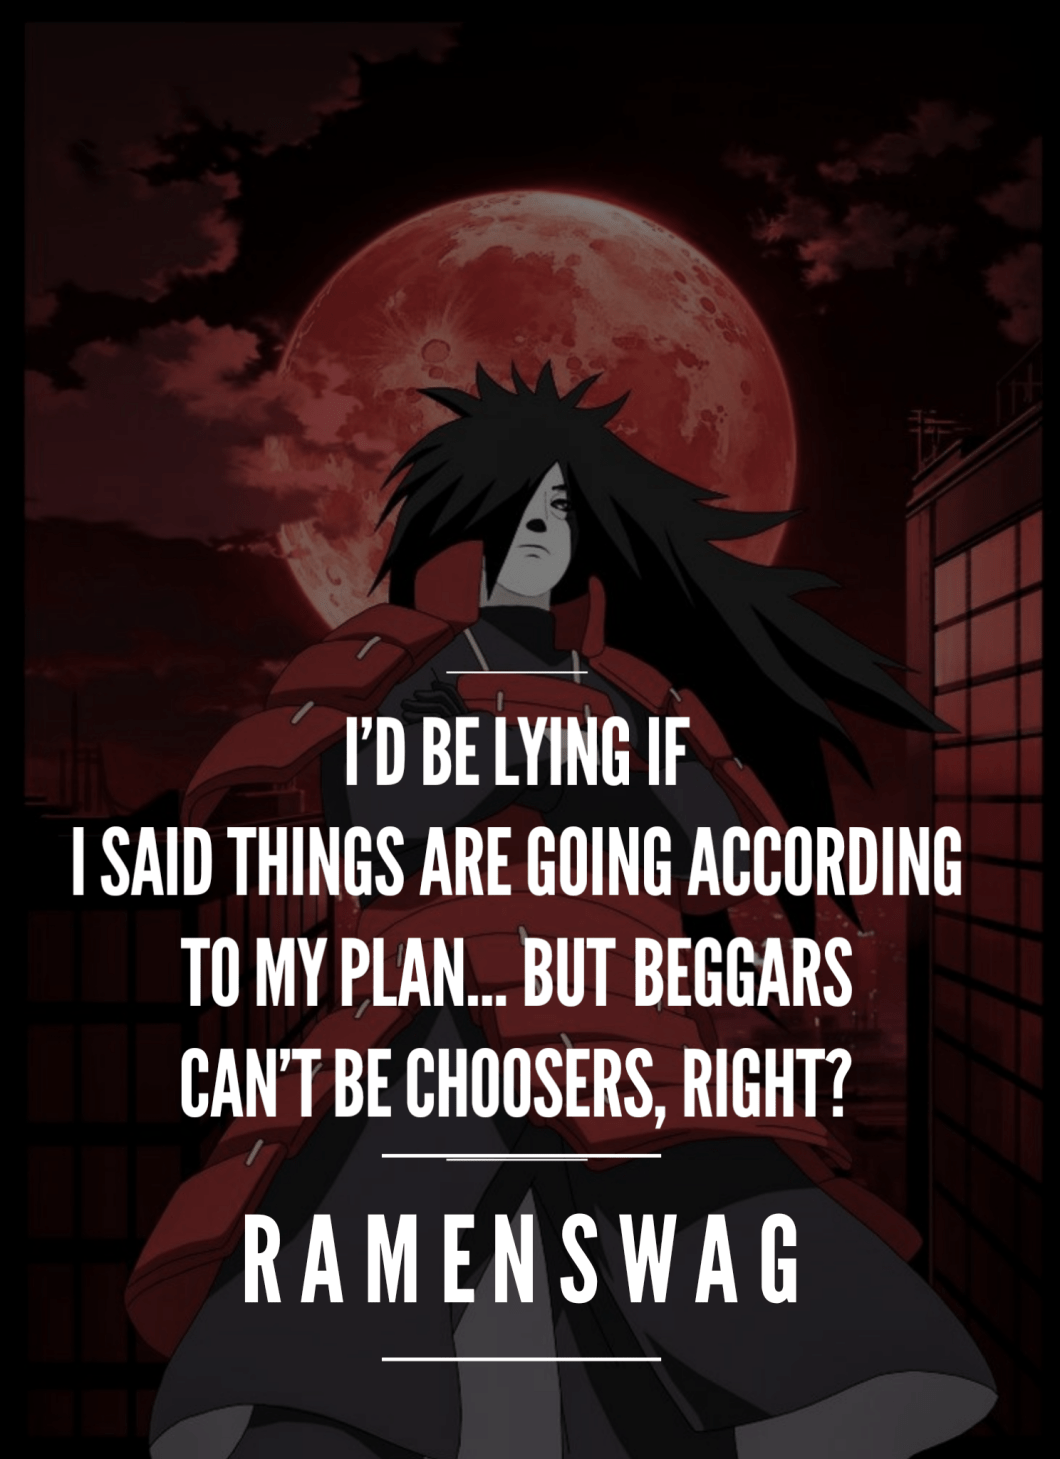 11 Uchiha Madara Quotes About Love and Life Absolutely Worth Sharing!